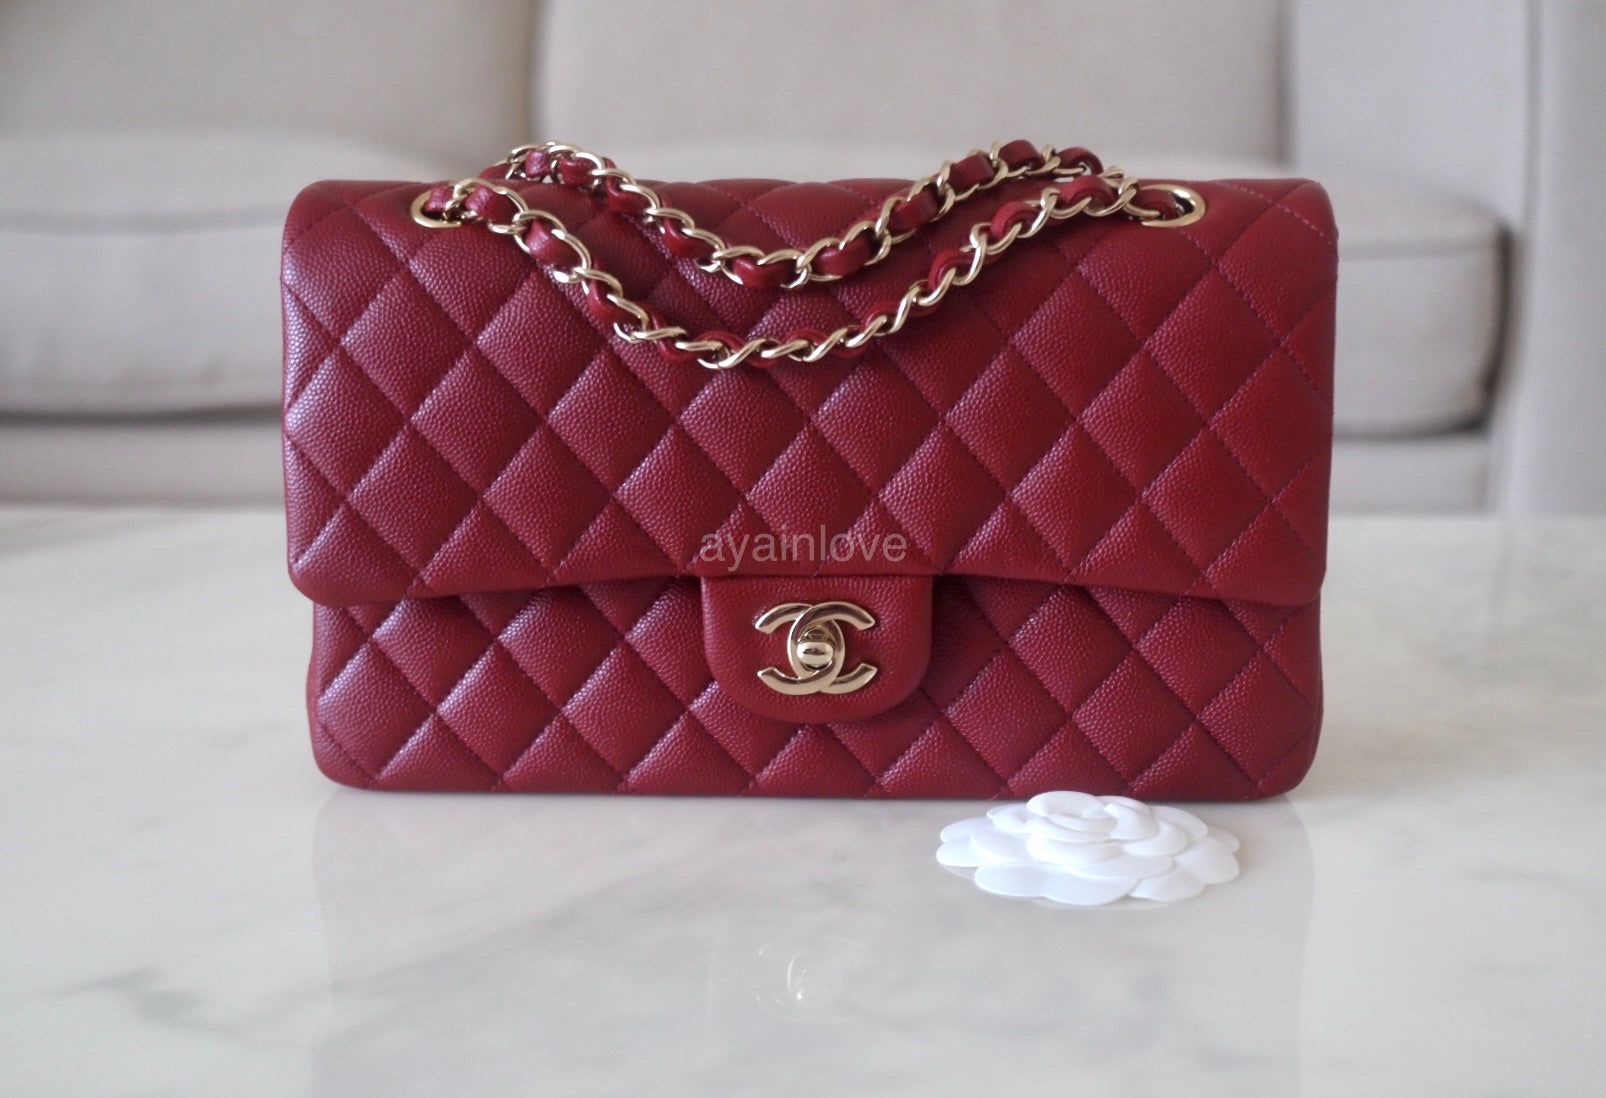 Bag of the Day 41: Chanel GABRIELLE Burgundy in Medium Lambskin Leather Bag  from 19B1 Collections 